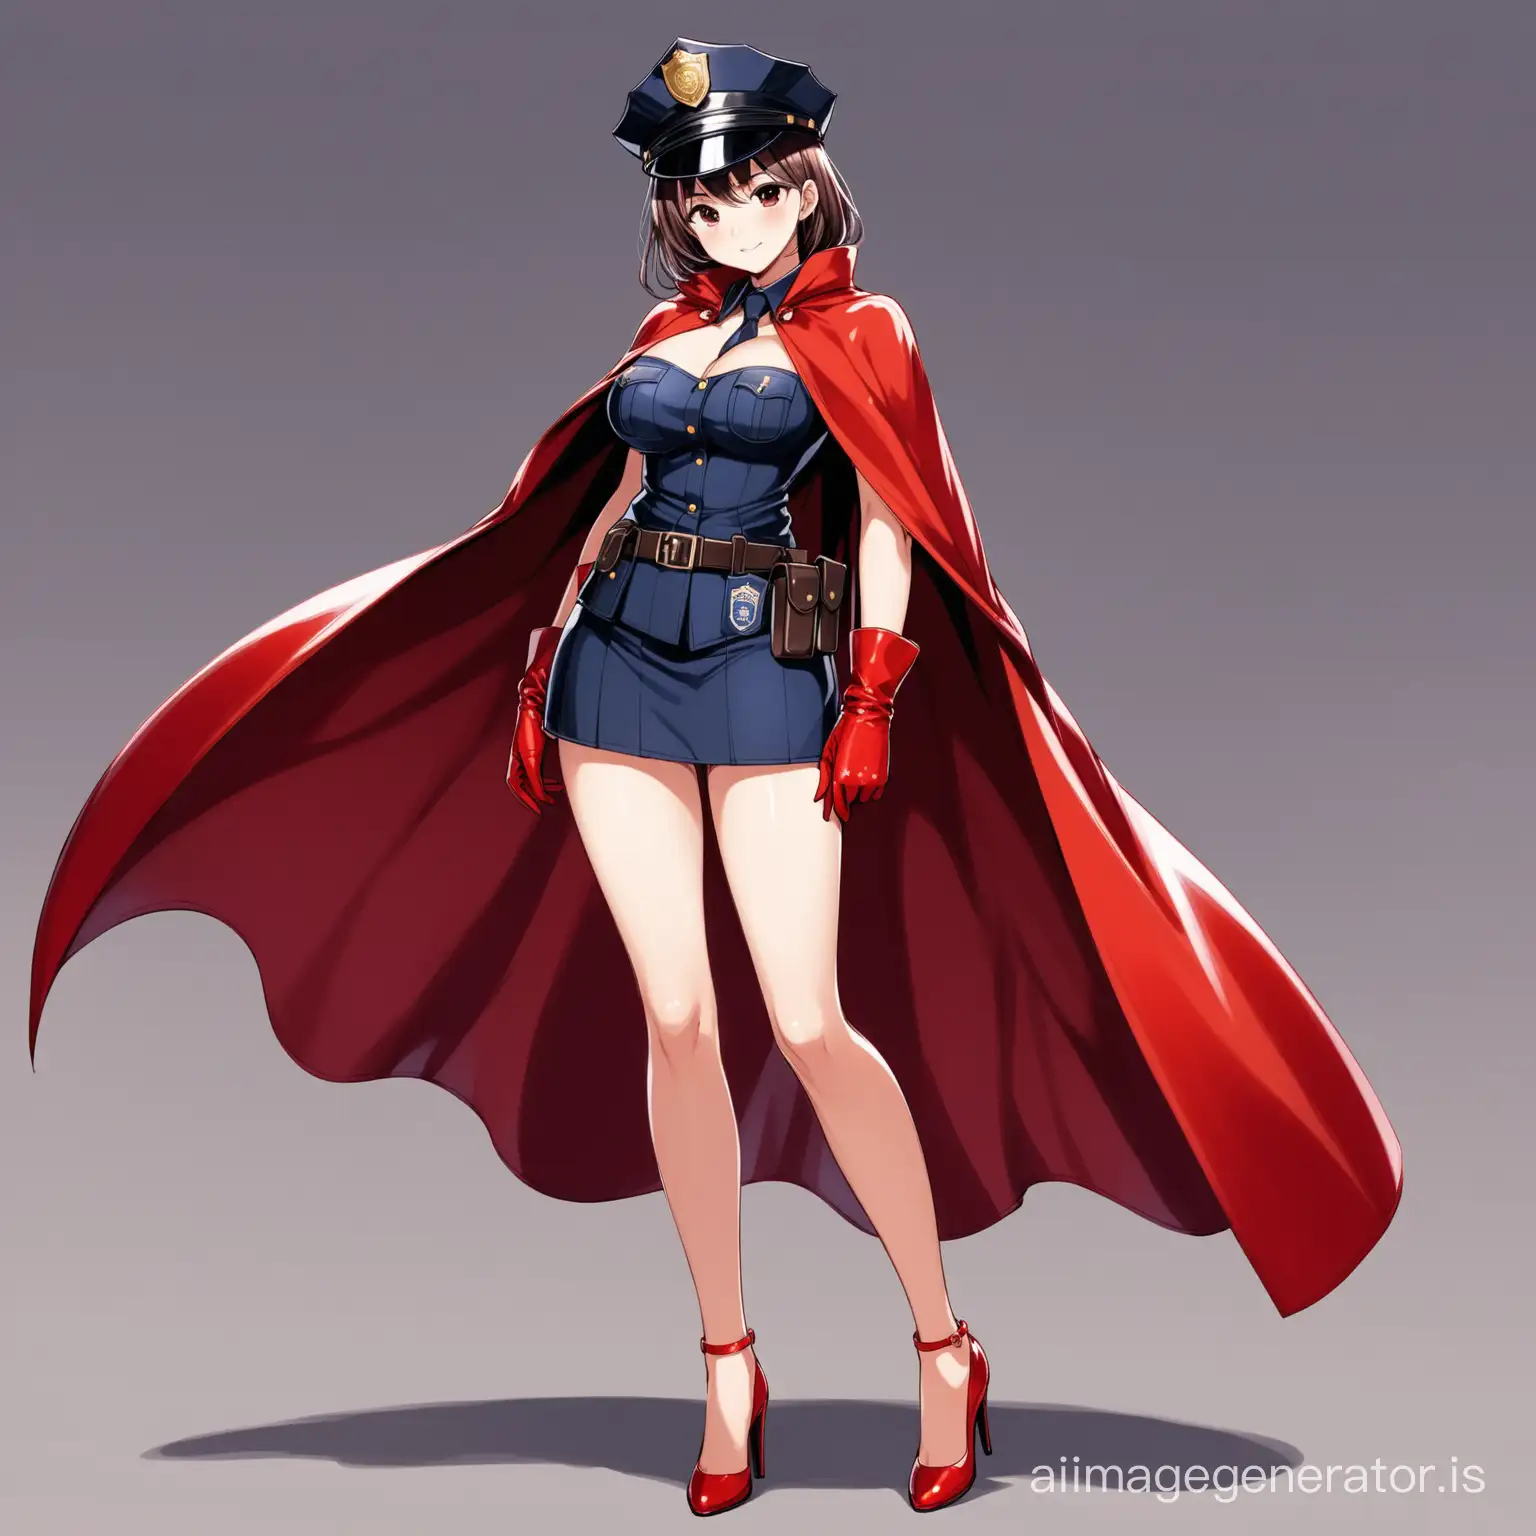 Attractive-Anime-Girl-in-Chic-PoliceThemed-Outfit-with-Red-Leather-Gloves